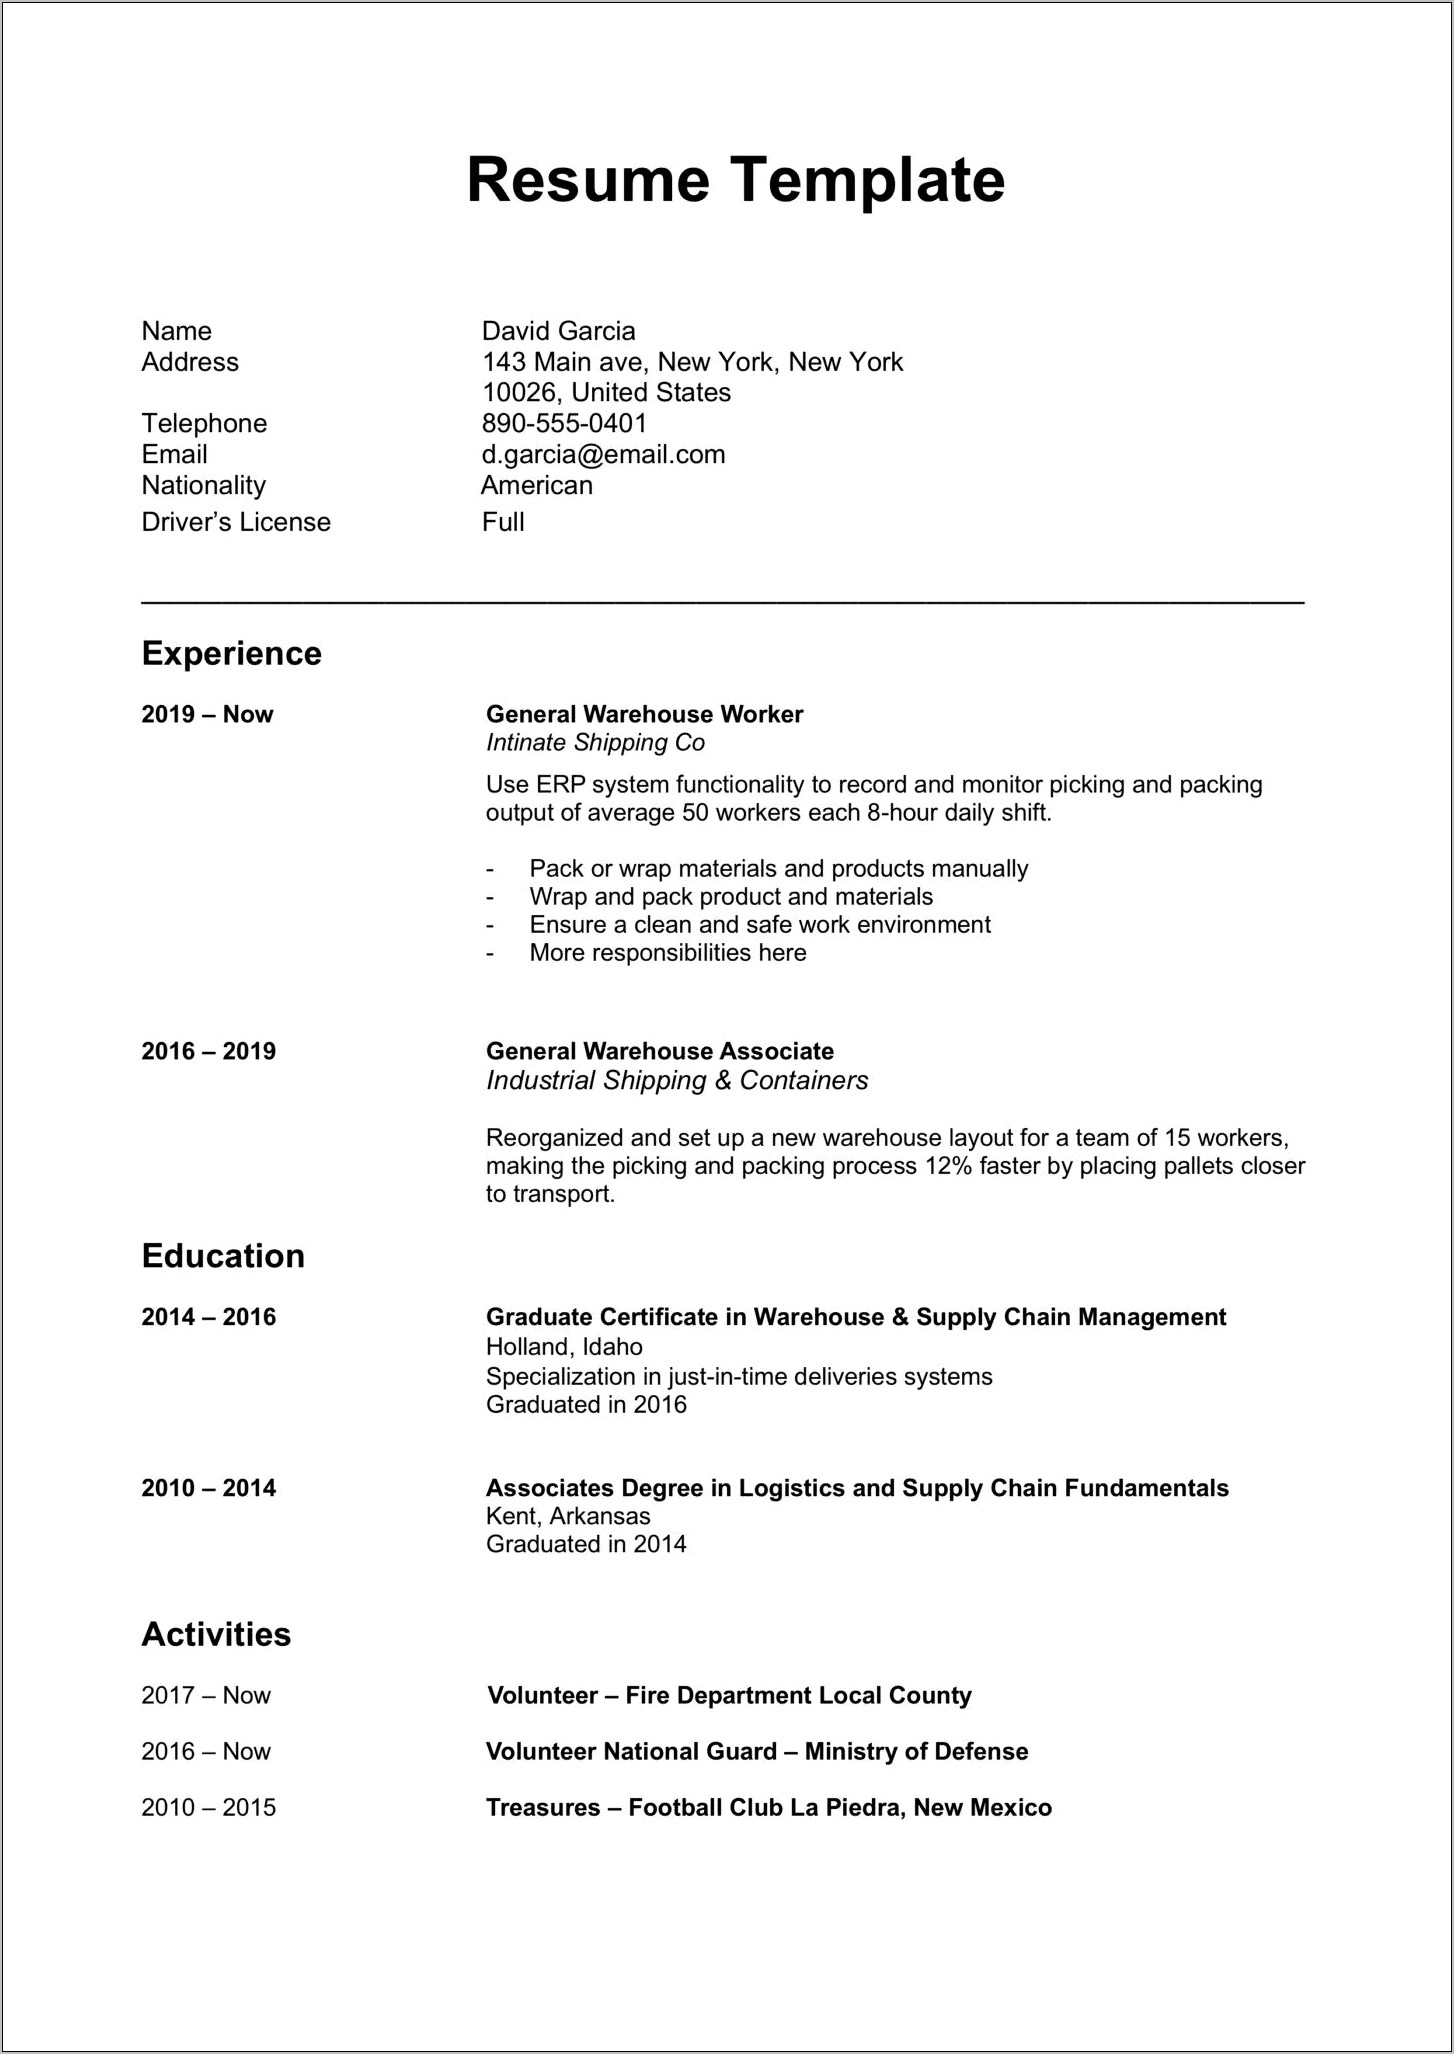 downloadable-word-document-free-resume-templates-resume-example-gallery